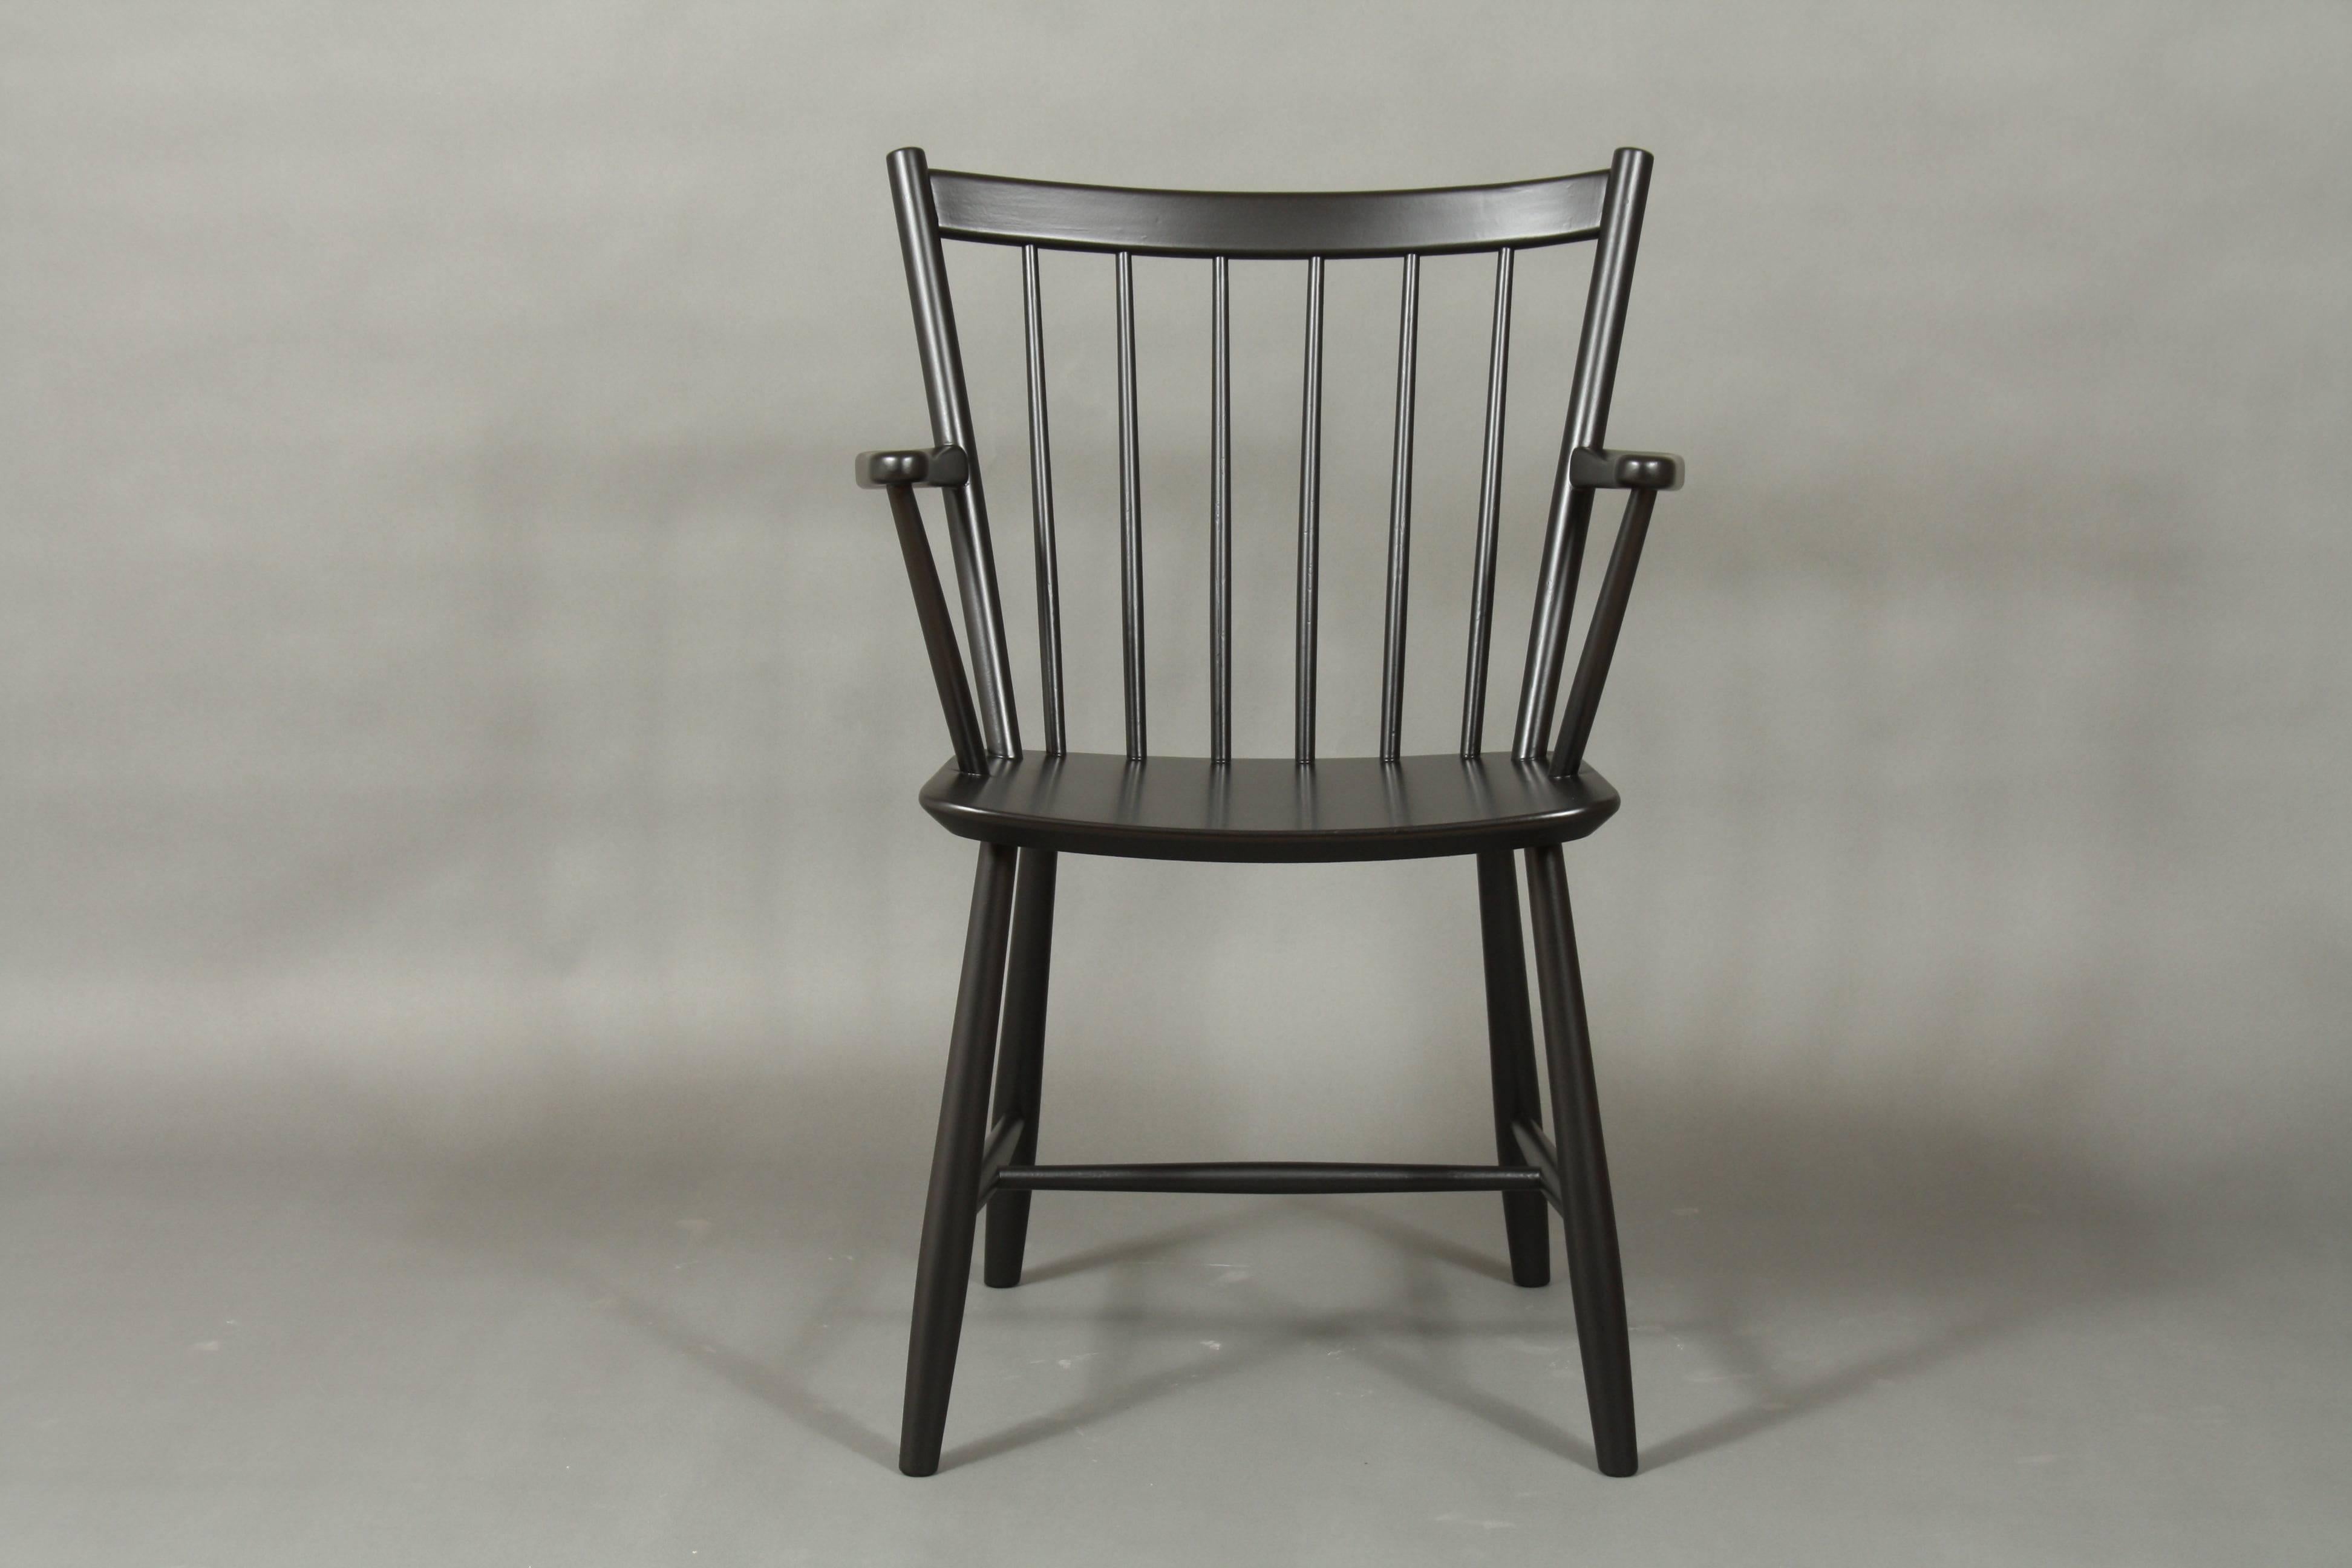 Børge Mogensen black dining chair, model J42. One of Børge Mogensen Classic designs from the 1950s. This chair is restored and new painted black. We have 3 at the store.